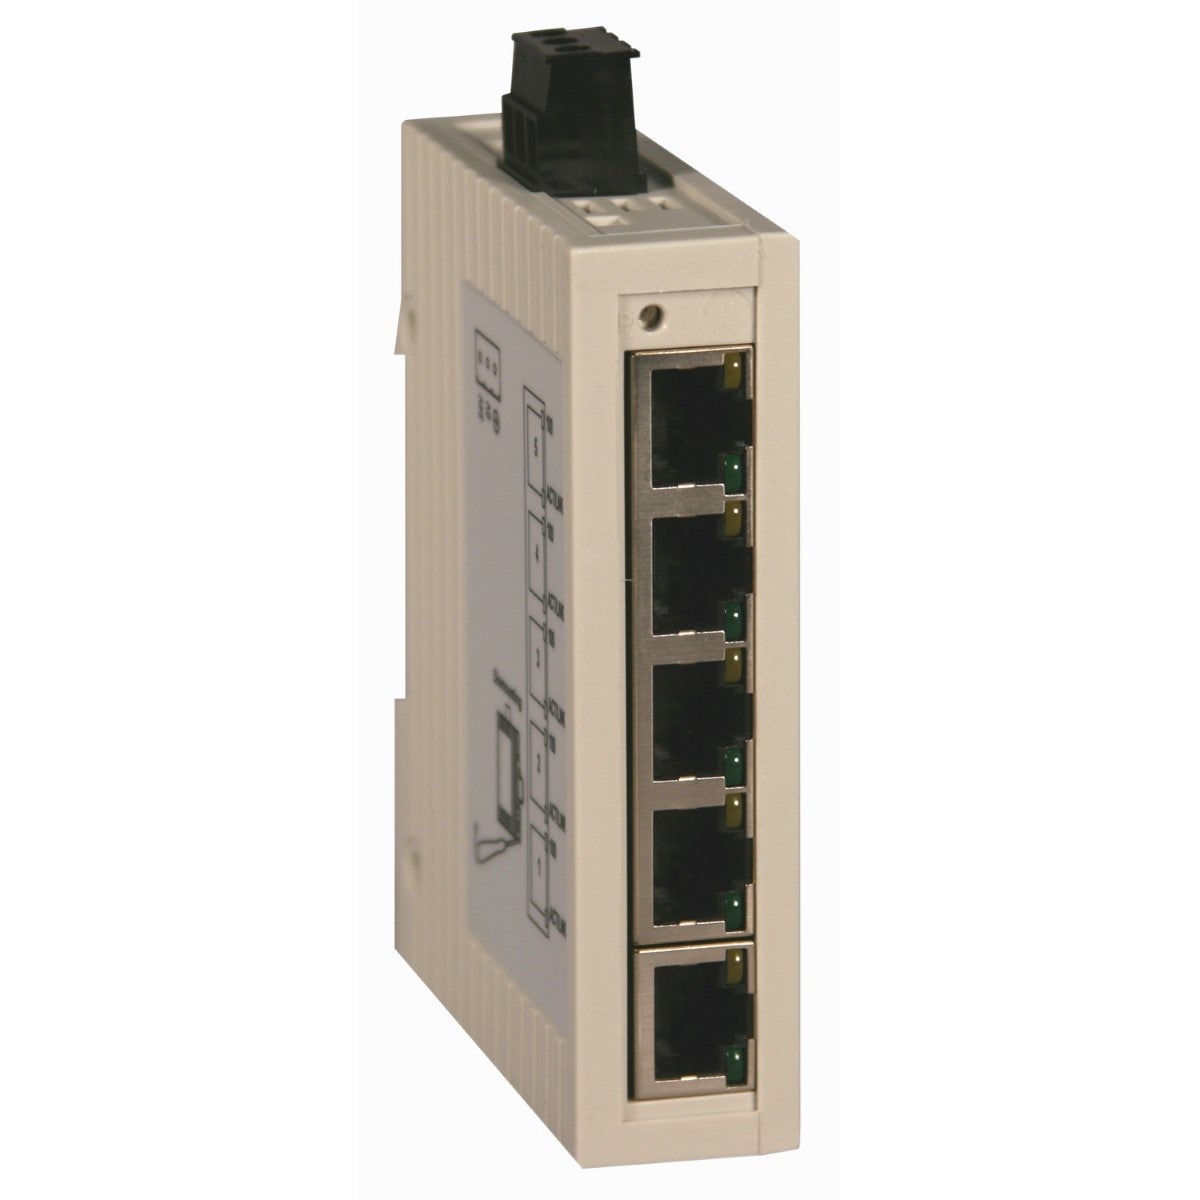 ConneXium Unmanaged Switch - 5 ports for copper